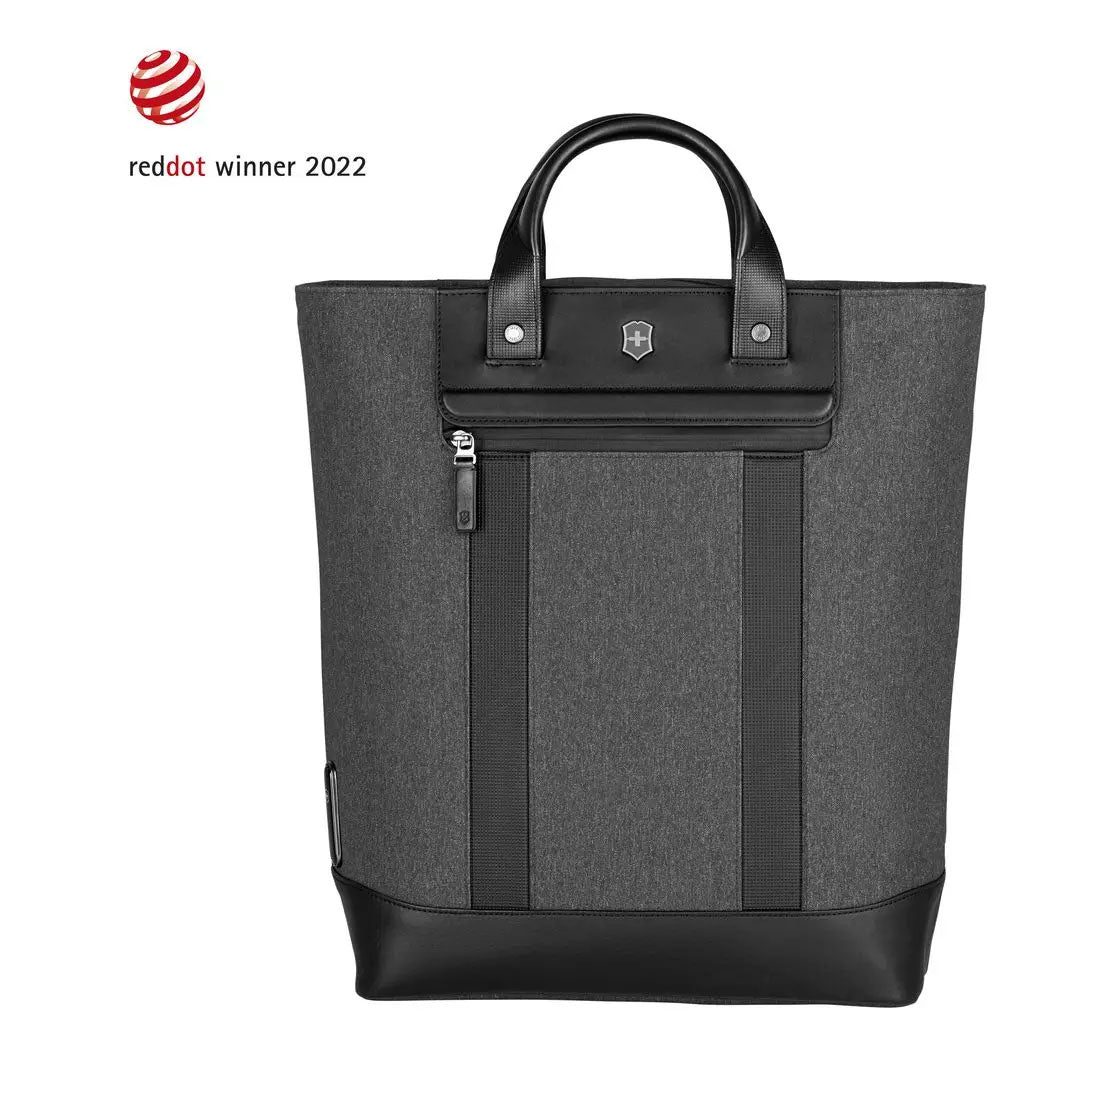 Victorinox Swiss Army Architecture Urban2 2-Way Carry Tote